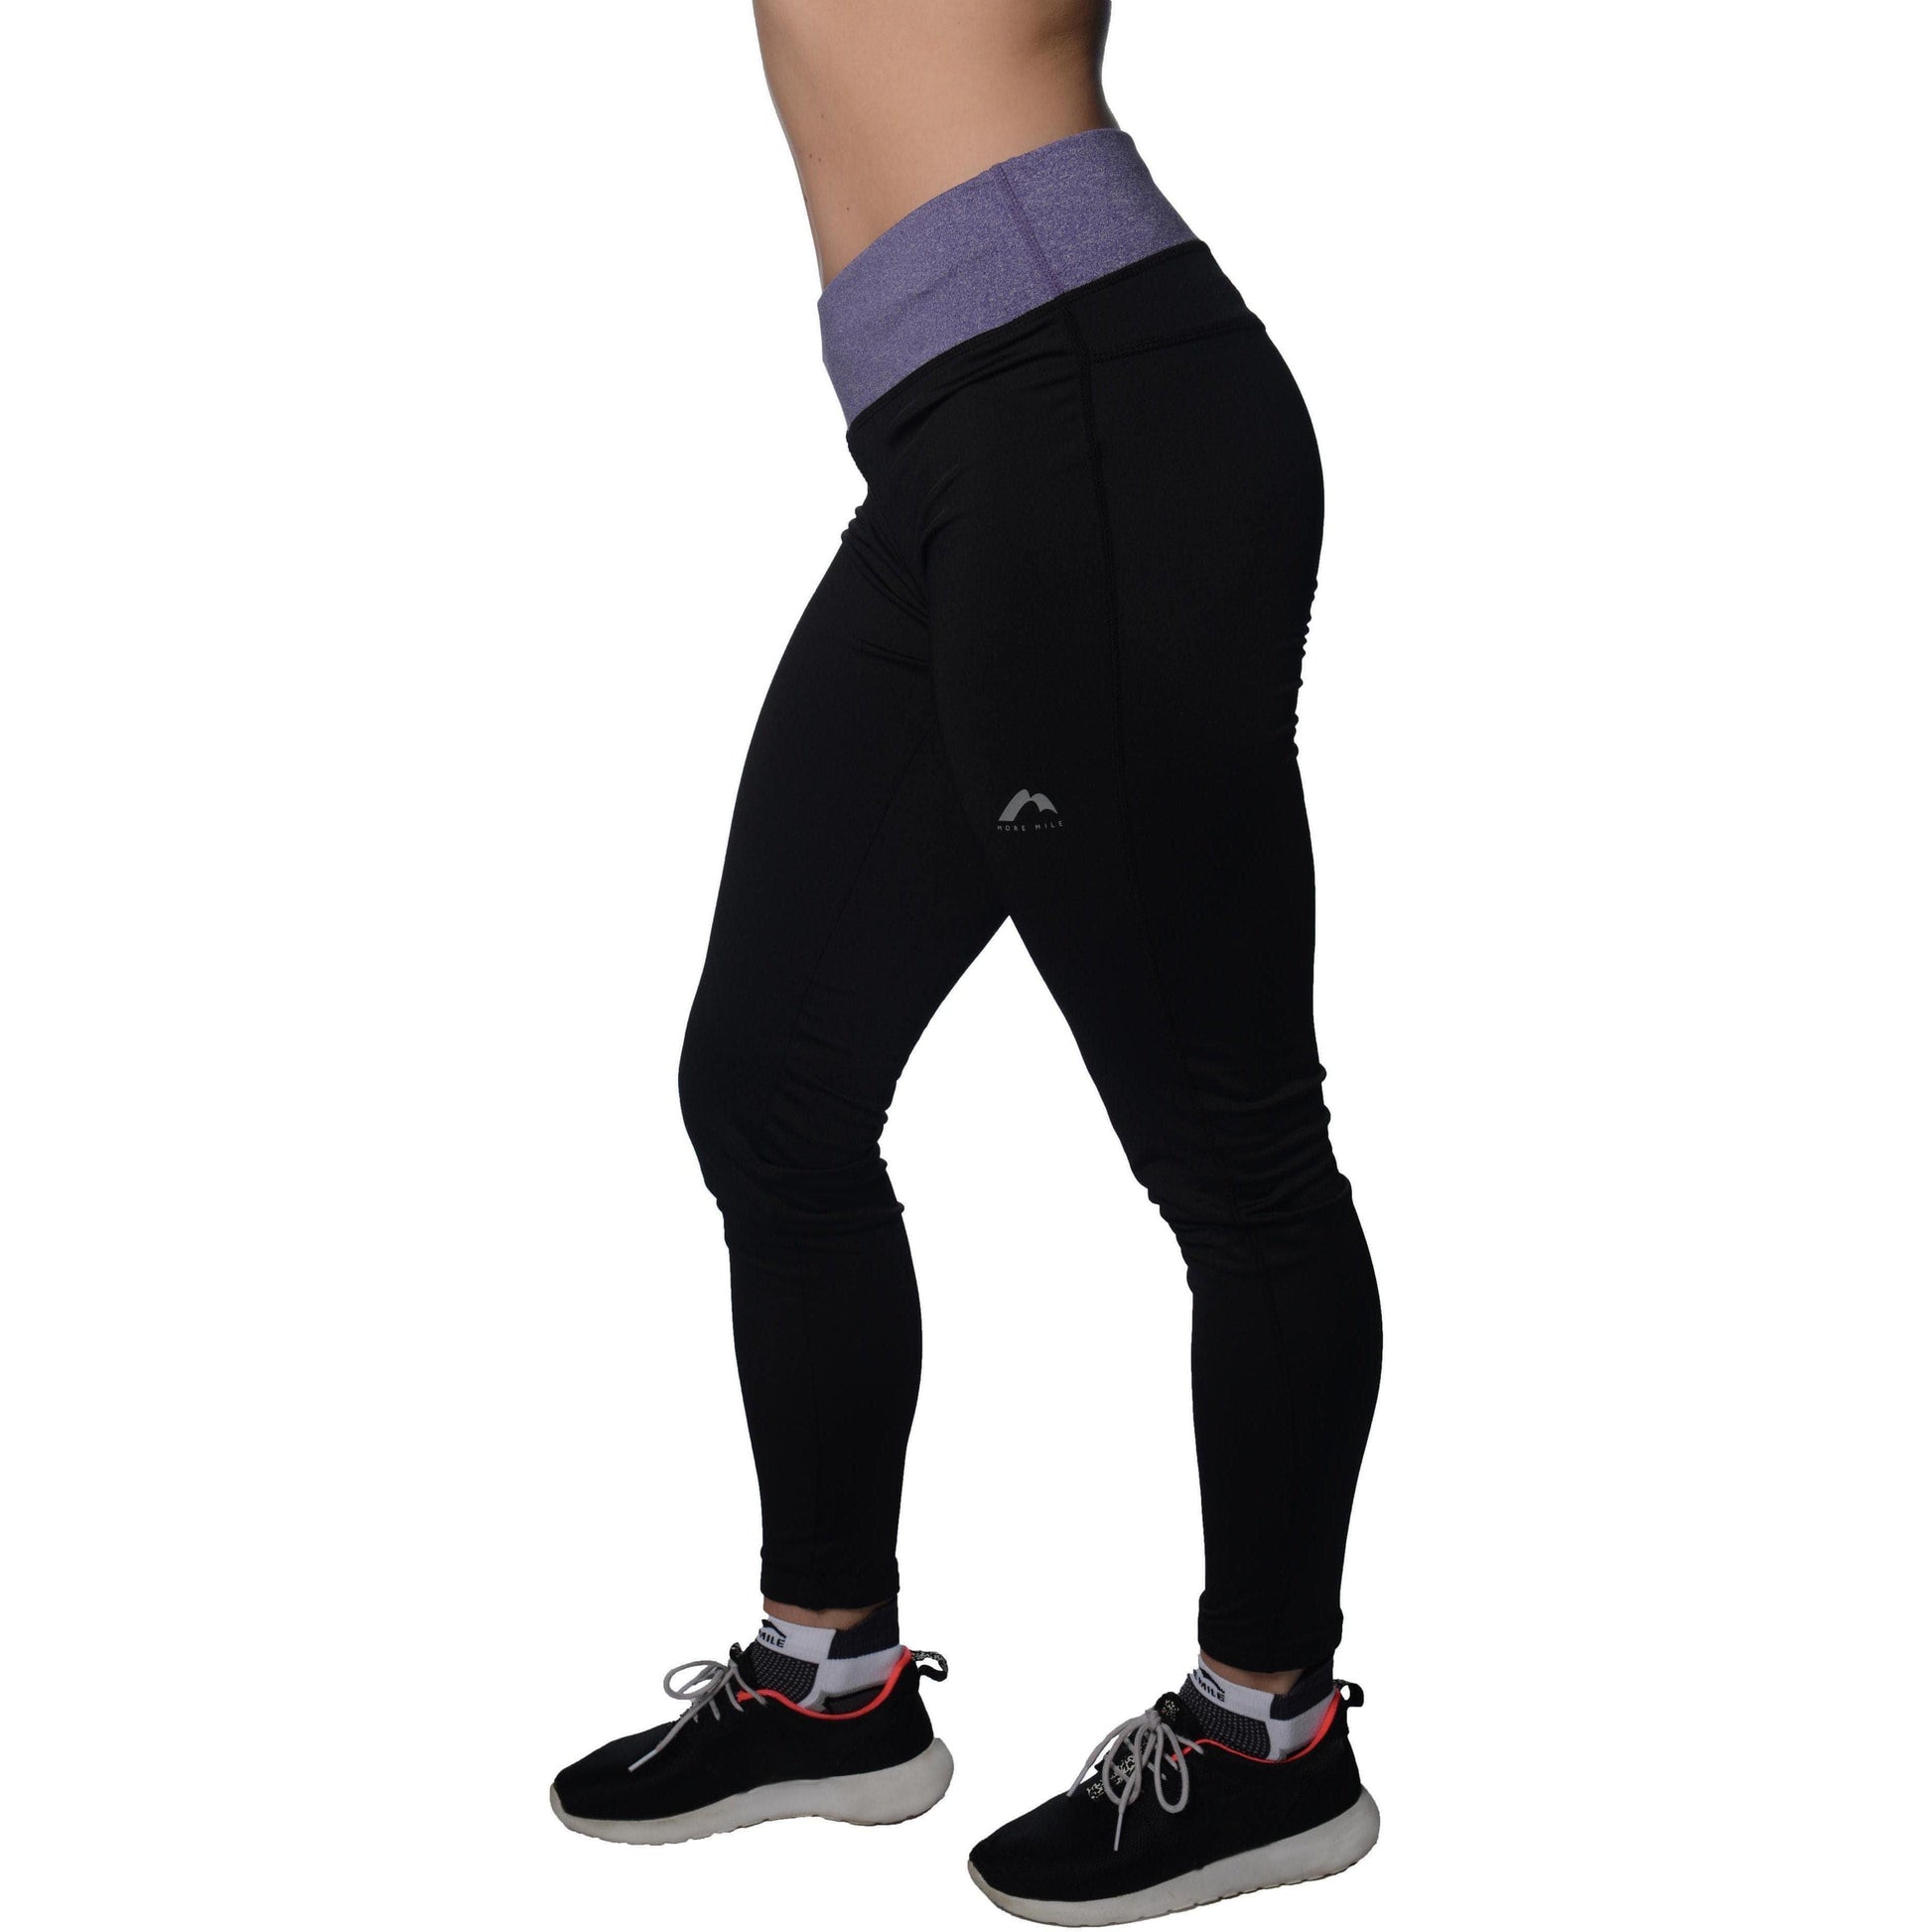 More Mile Marl Womens Long Training Tights - Black - Start Fitness